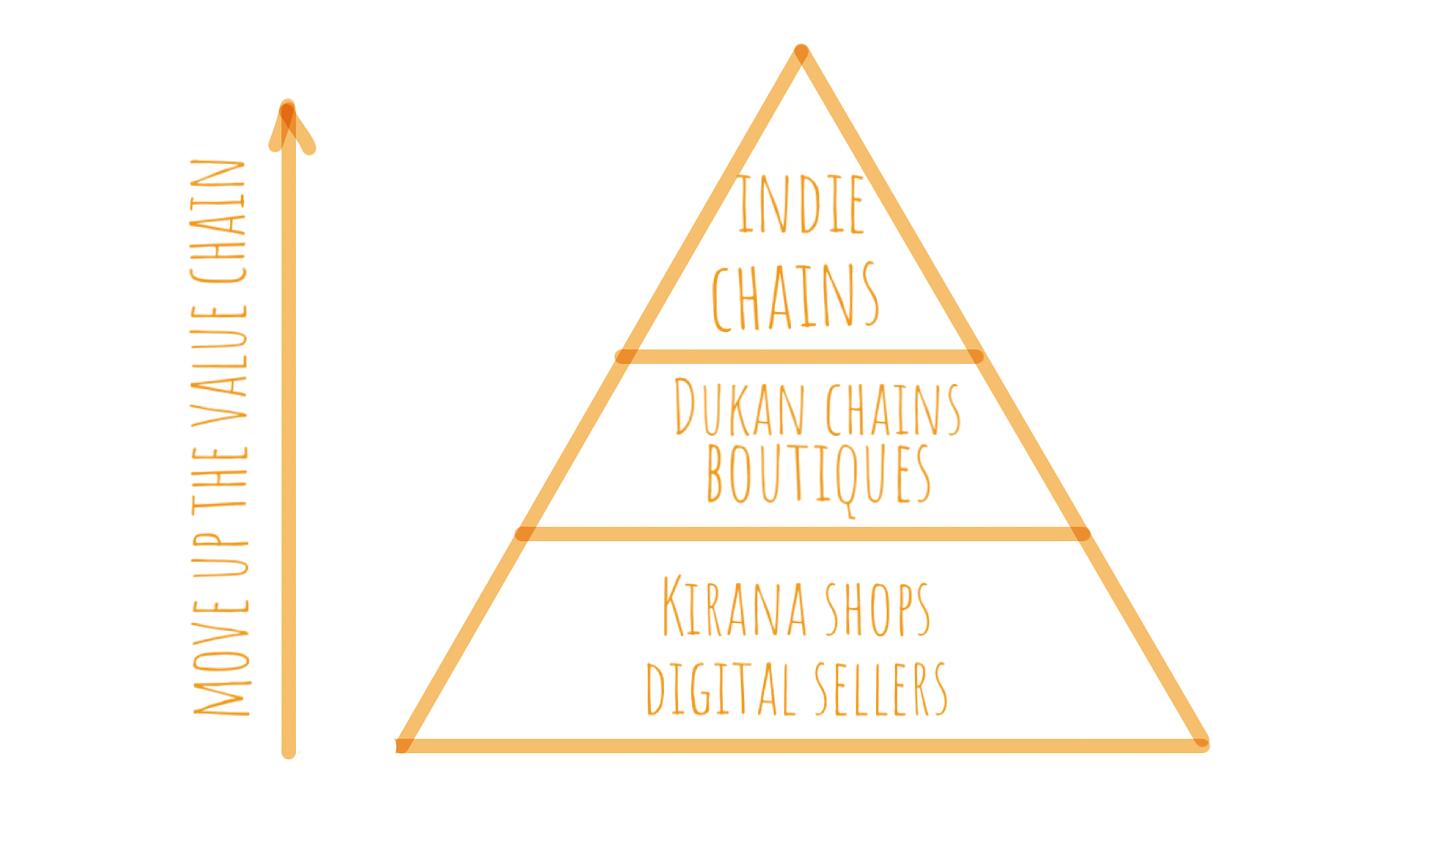 Customer pyramid for dukan apps - idea is to move up the value chain